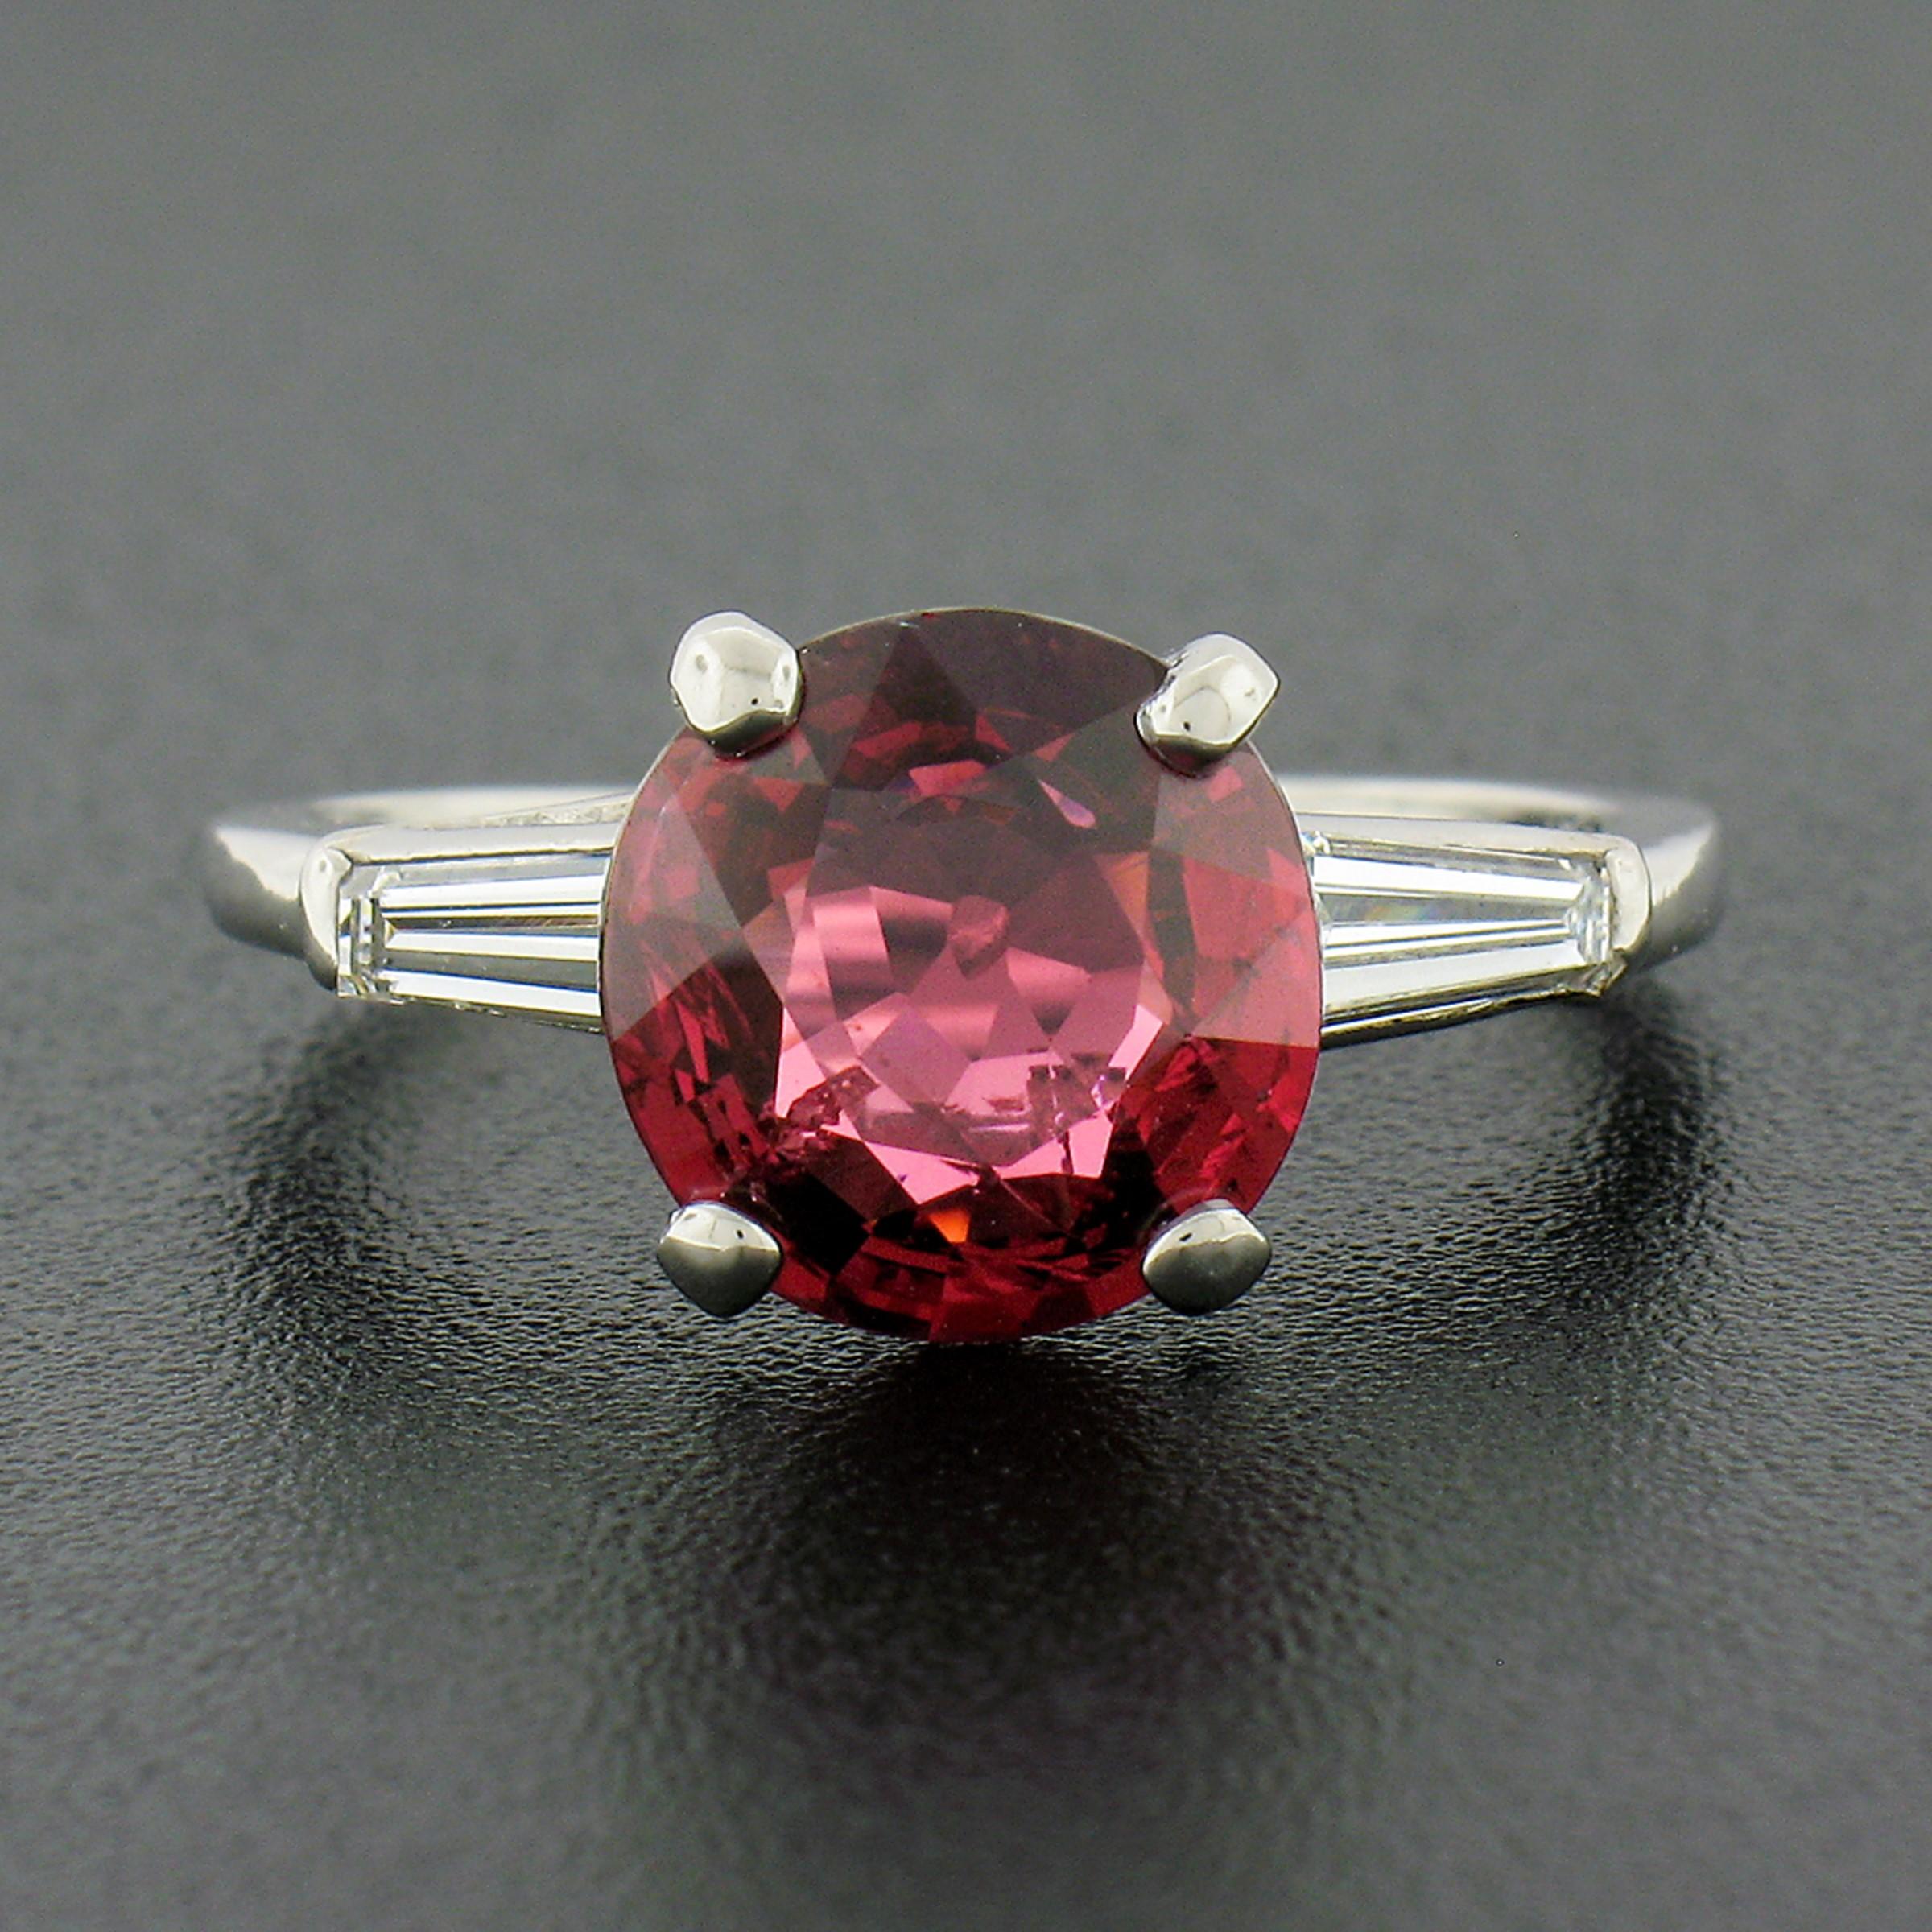 This outstanding vintage ring was hand crafted from solid 950 platinum and features a gorgeous, 2.78 carat, GIA certified red spinel prong set at its center. This magnificent deep red spinel has been certified by GIA as being a 100% natural stone,